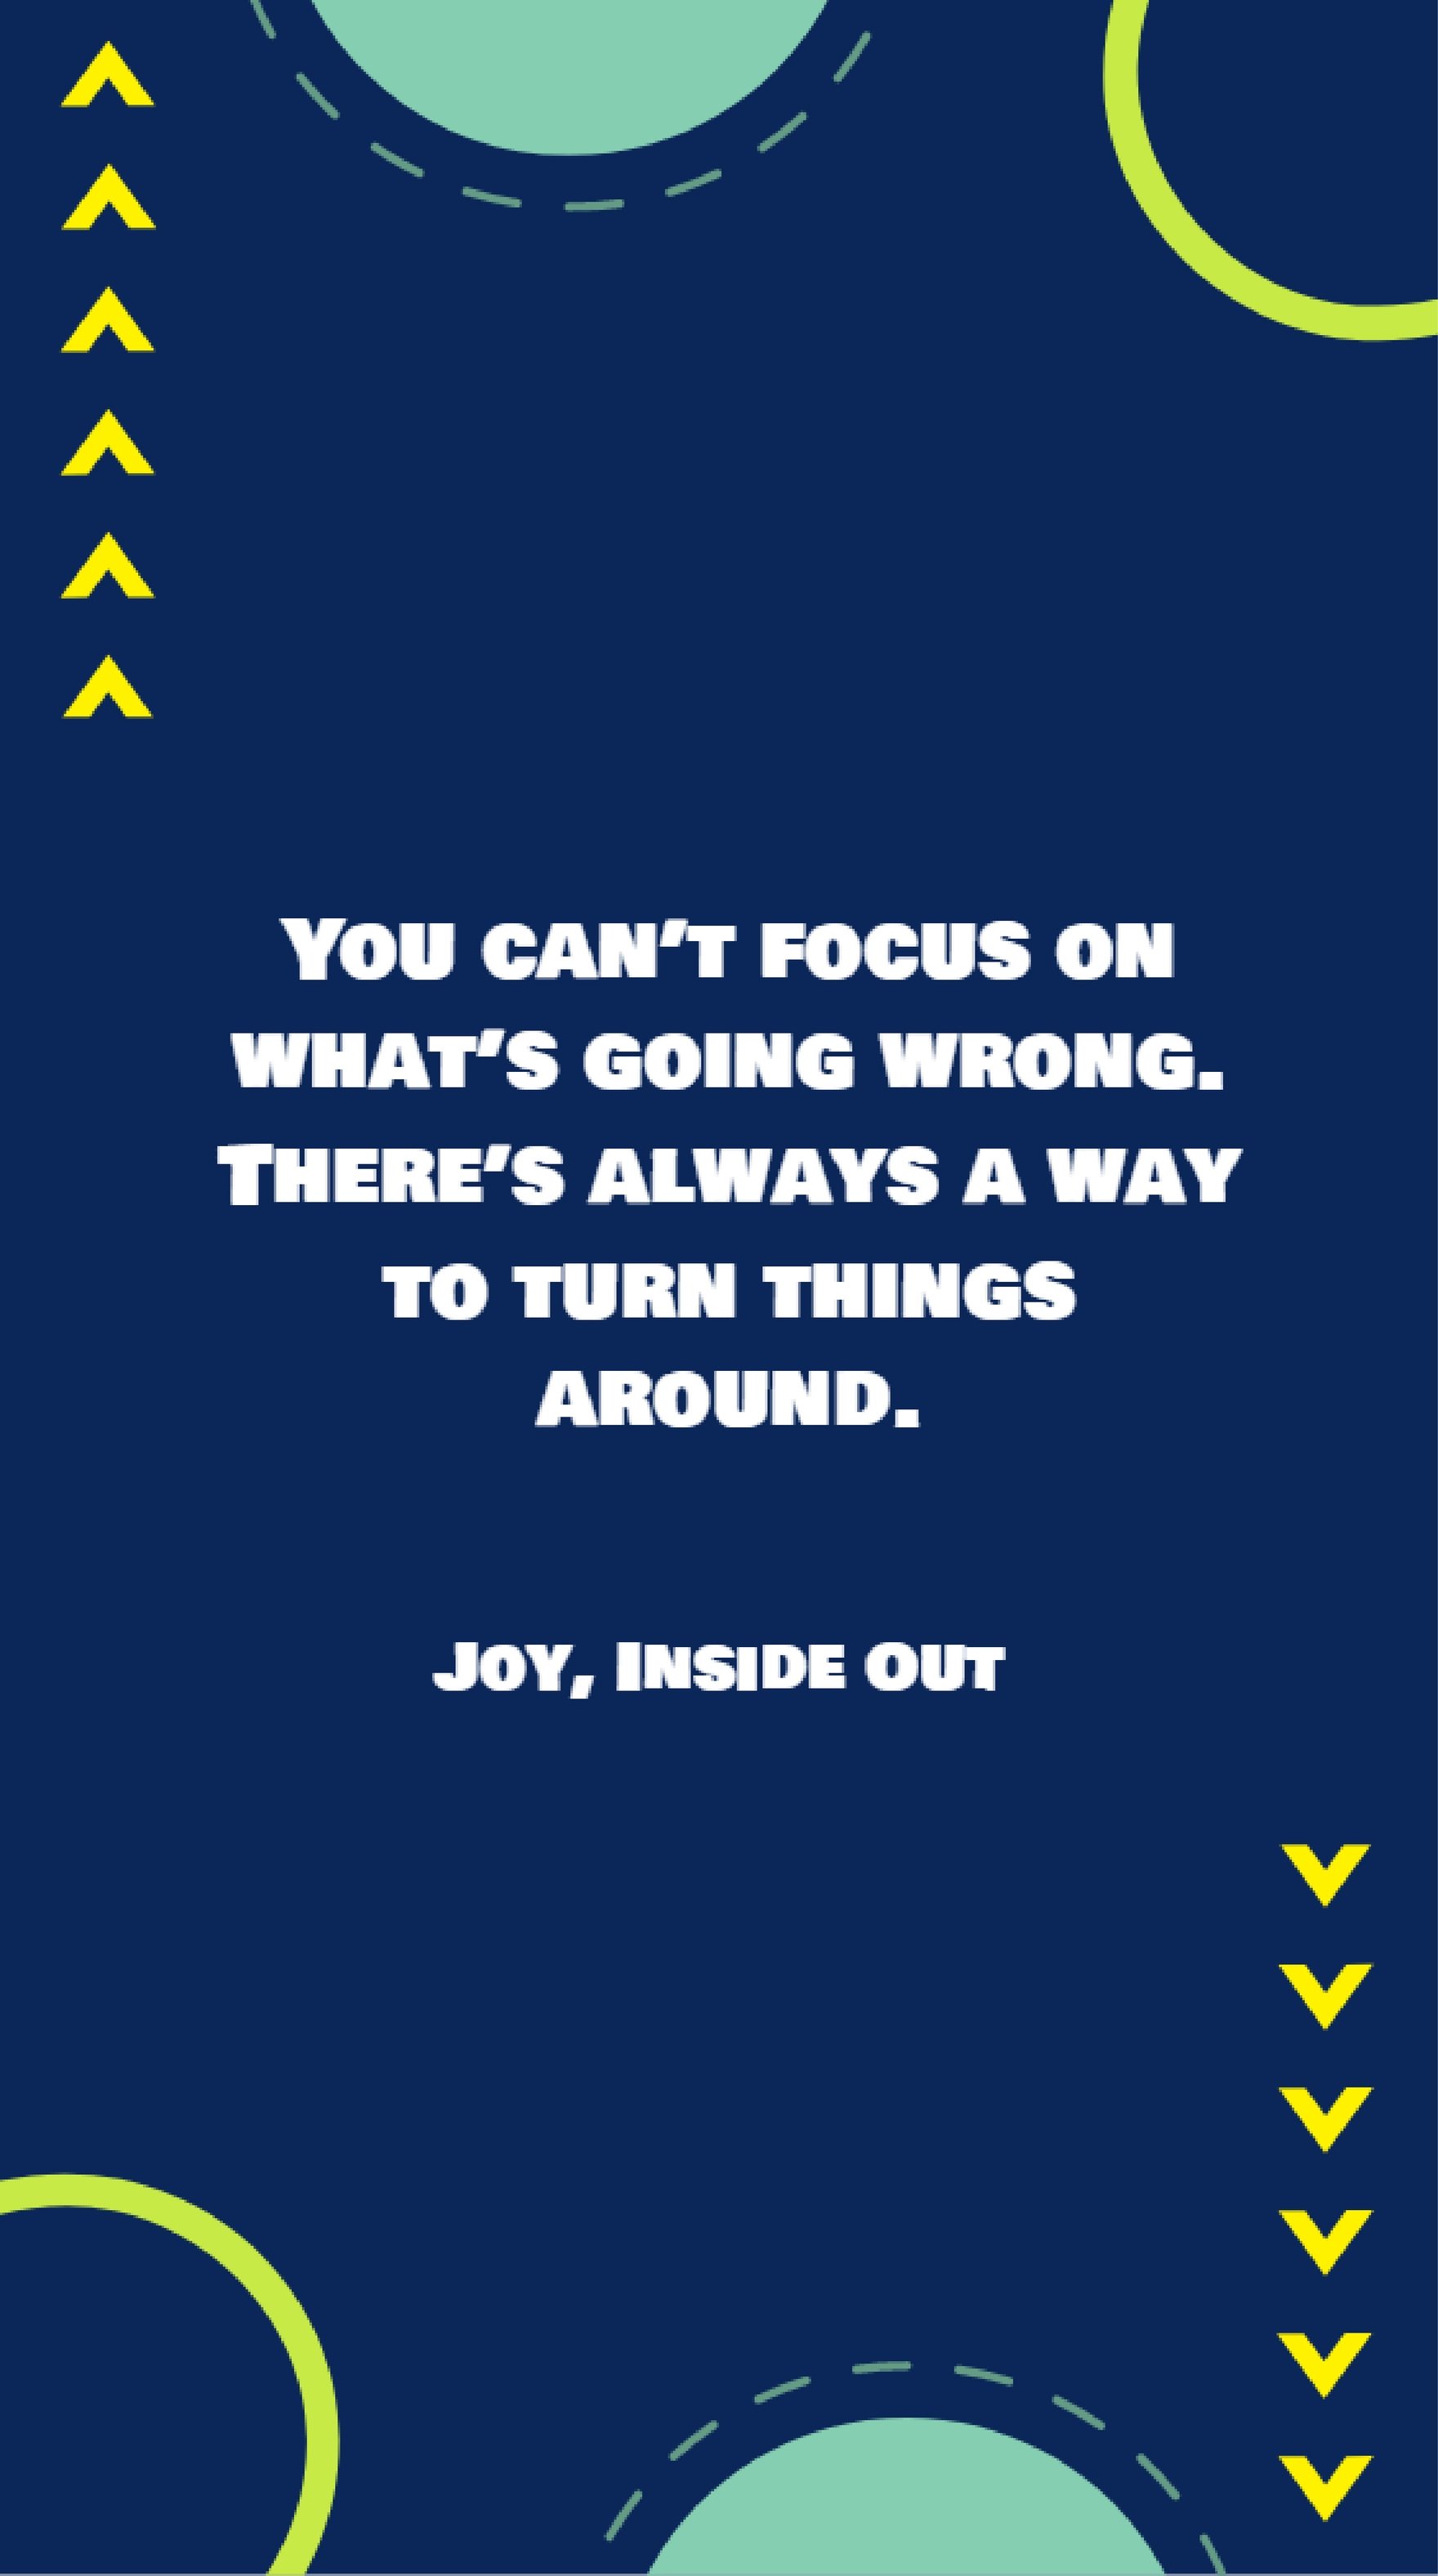 Joy, Inside Out - “You can’t focus on what’s going wrong. There’s always a way to turn things around.”